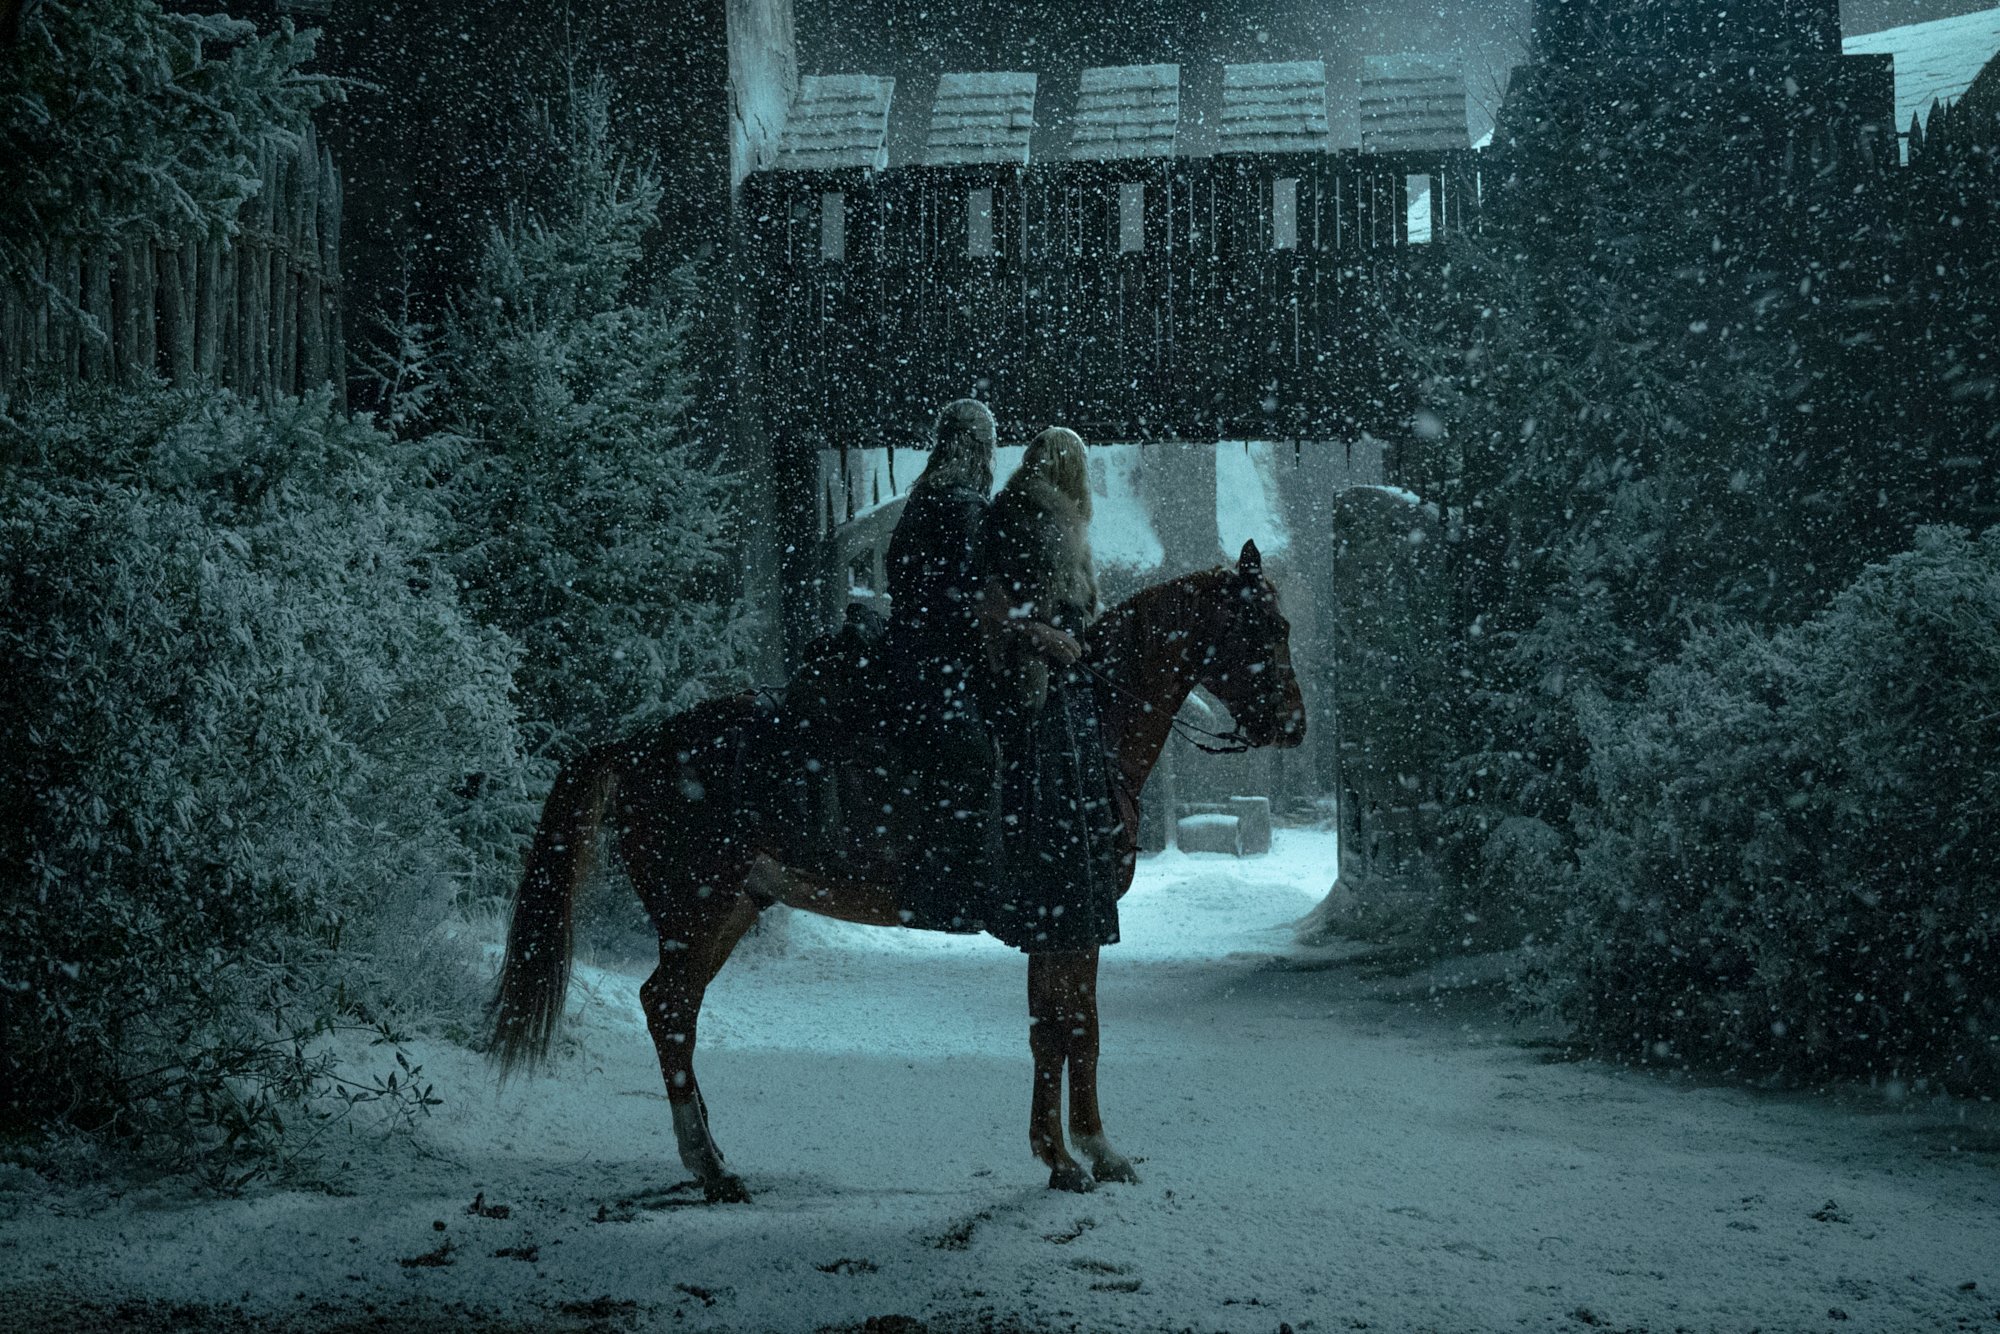 Henry Cavill as Geralt and Freya Allen as Princess Cirilla ride a horse in the snow during The Witcher Season 2